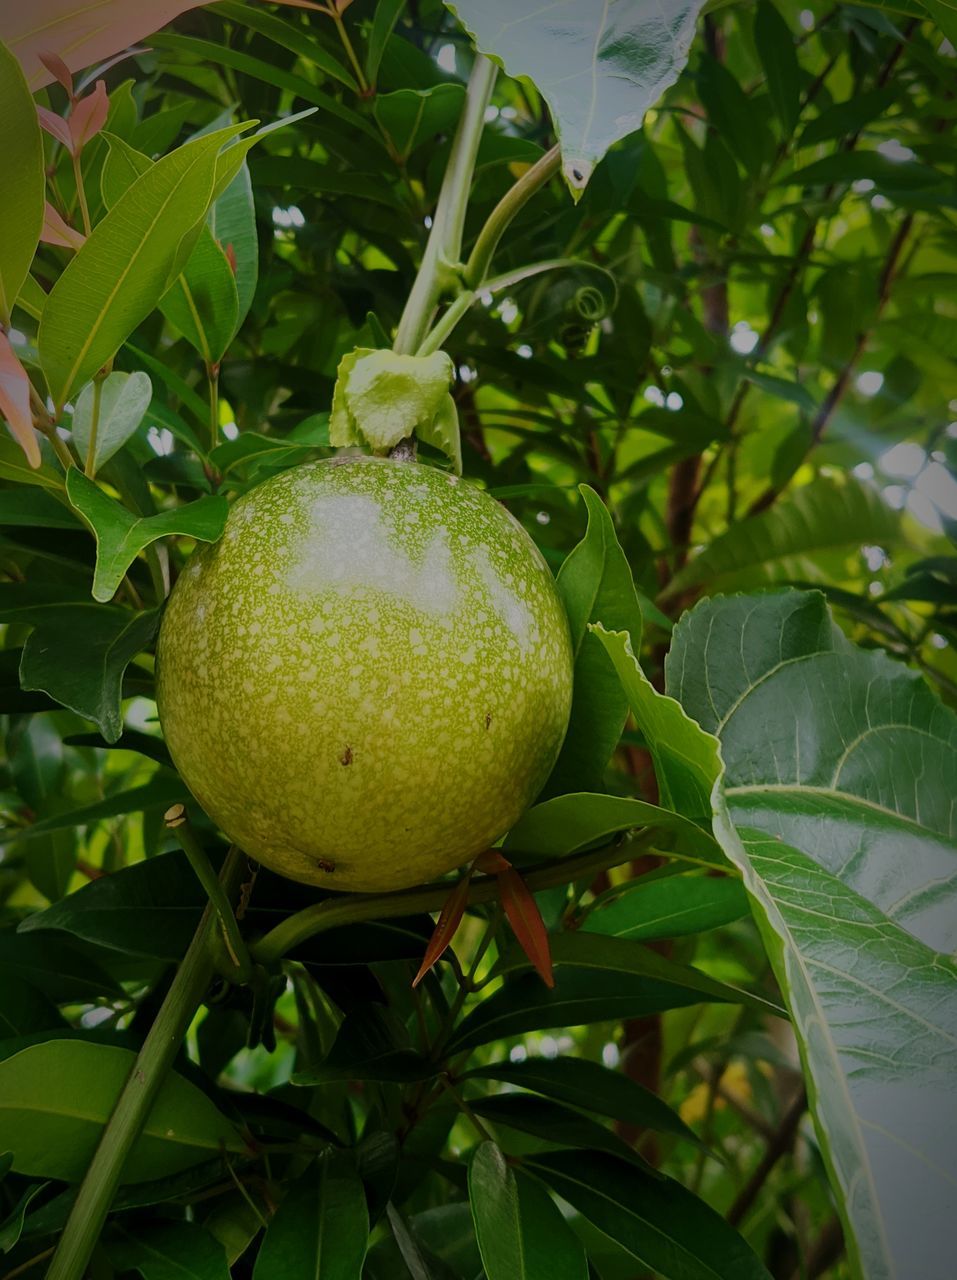 food, fruit, food and drink, healthy eating, plant, leaf, plant part, growth, tree, freshness, wellbeing, produce, green, agriculture, citrus, nature, bitter orange, fruit tree, citrus fruit, no people, flower, organic, ripe, lemon tree, close-up, tropical fruit, outdoors, lemon, hanging, juicy, branch